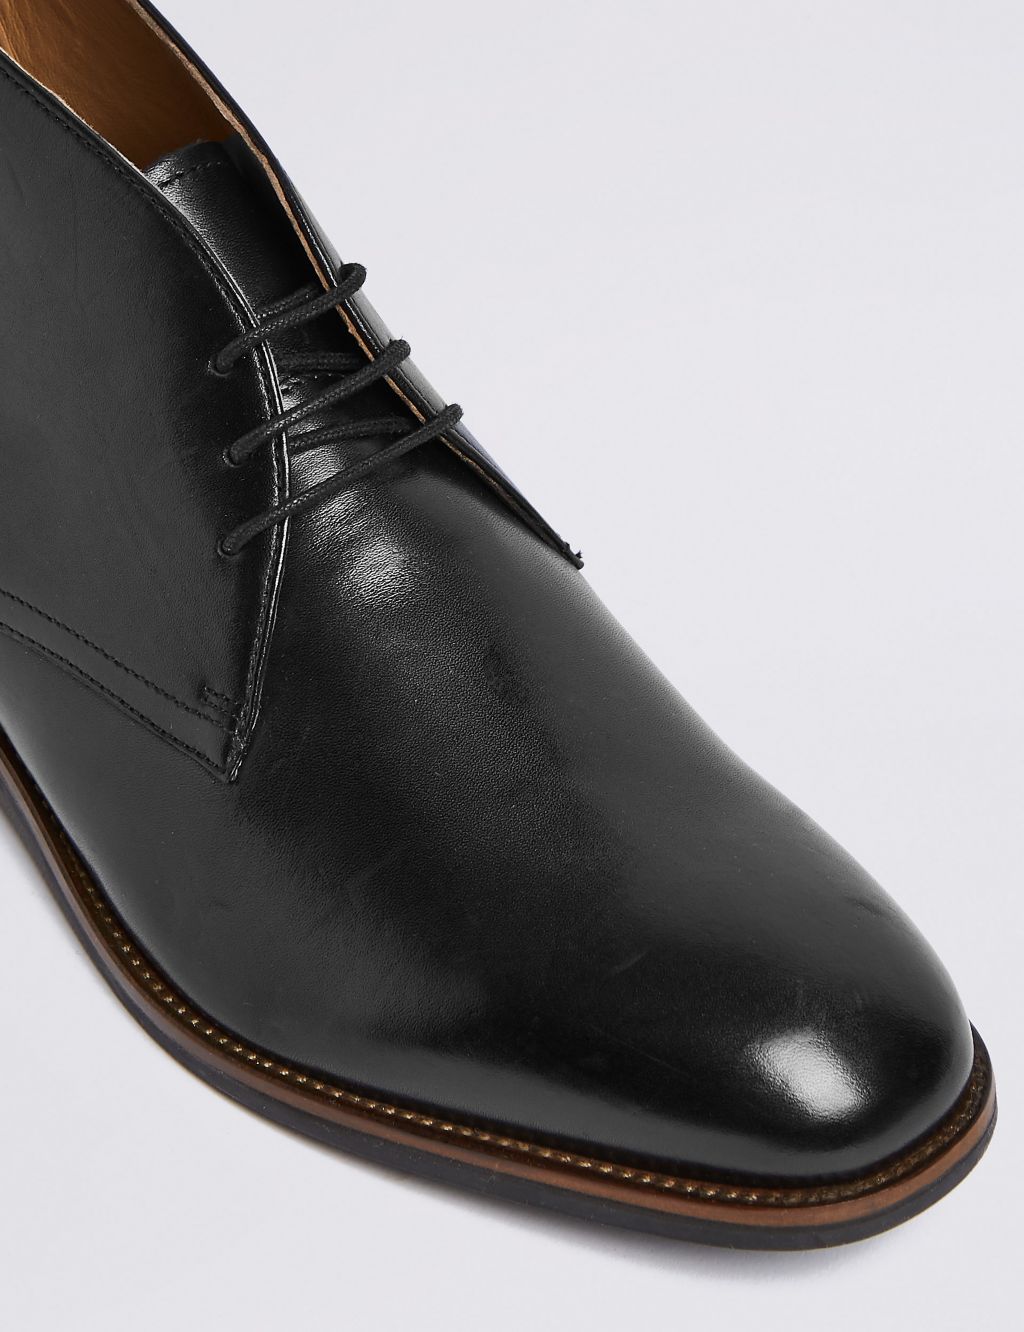 Leather Chukka Boots | M&S Collection | M&S